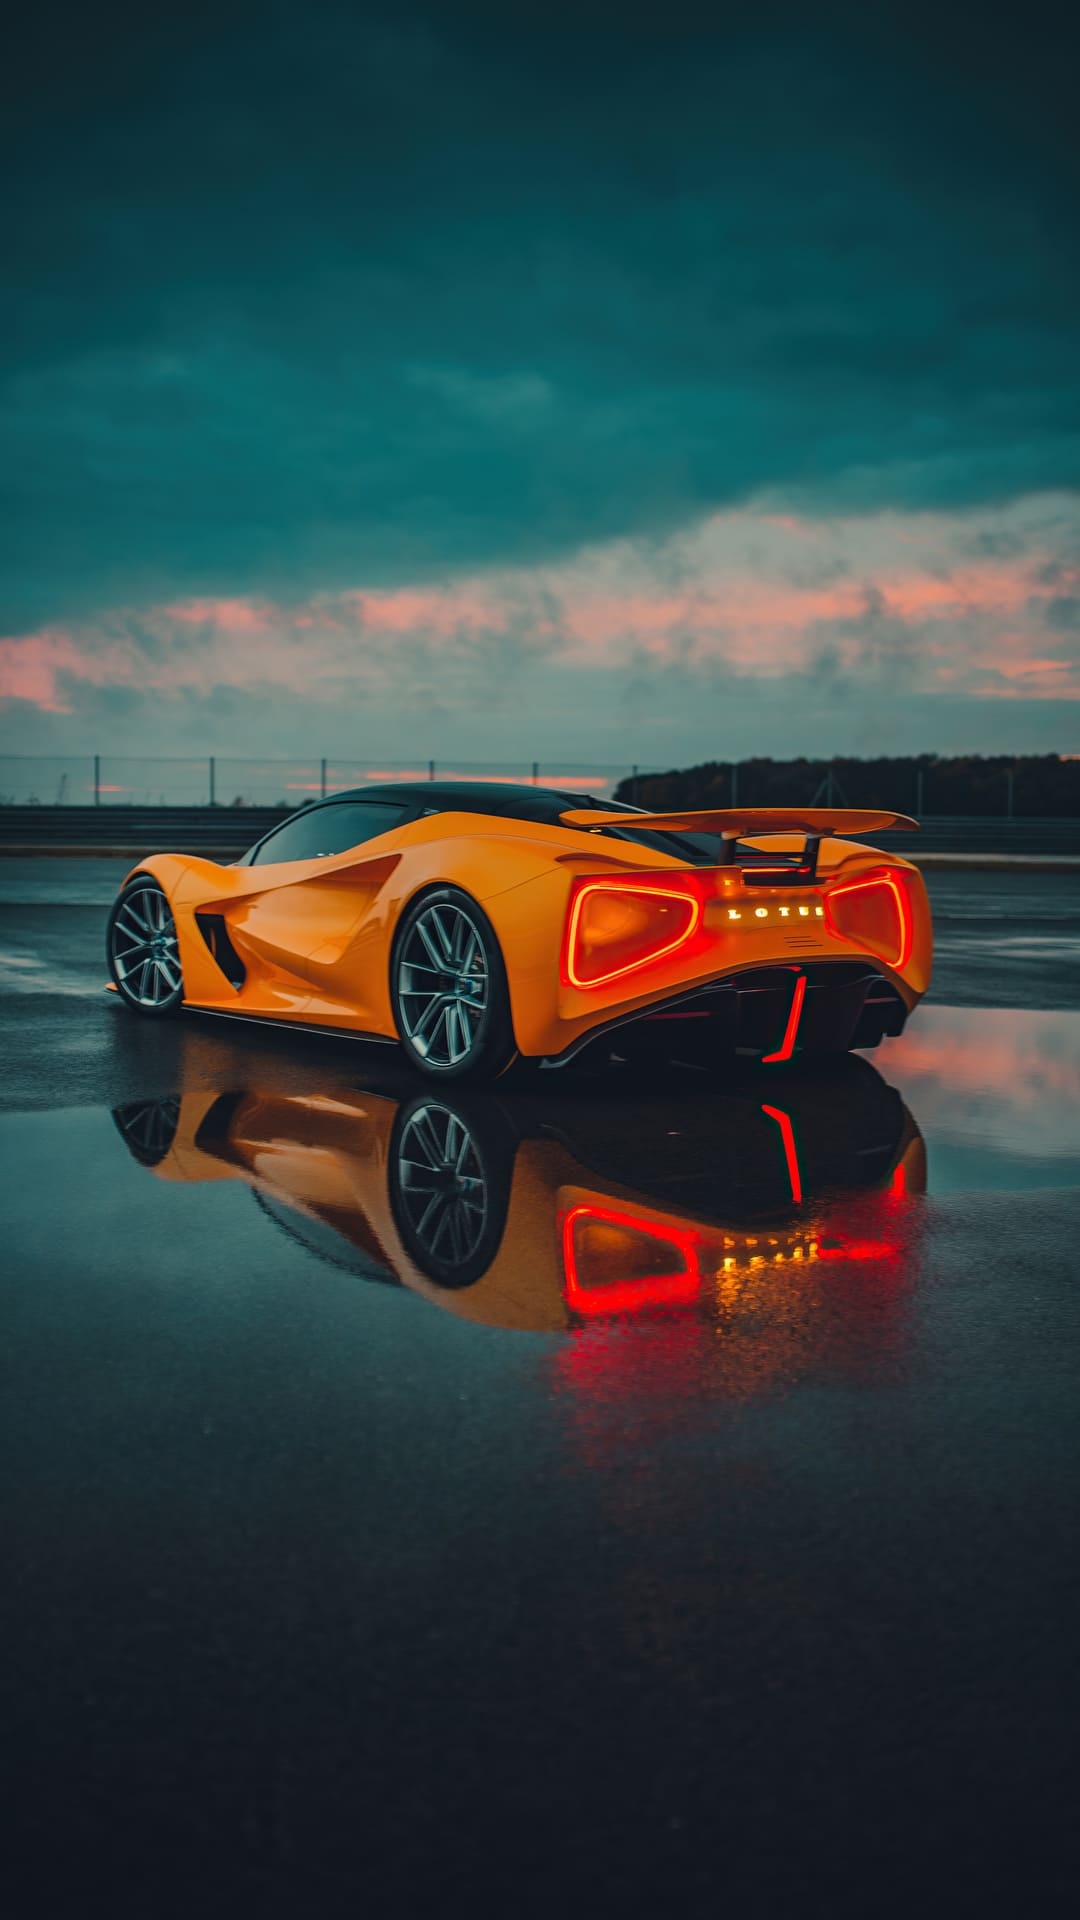 Sports Car: Advanced traction control systems, Lotus Evija. 1080x1920 Full HD Background.